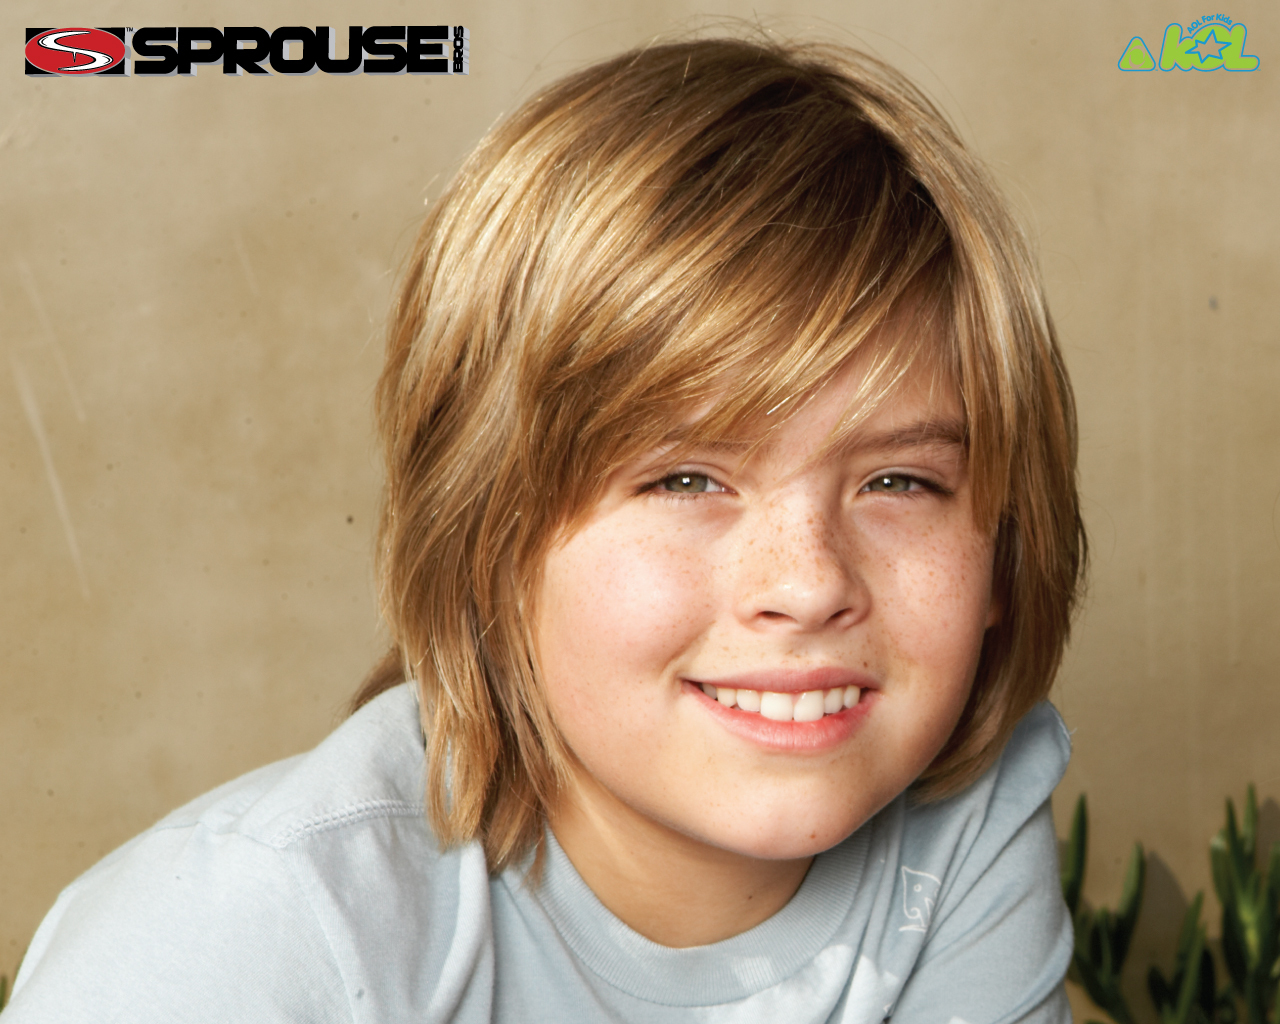 5. "Blonde Hair Teenage Male" by Cole Sprouse - wide 2